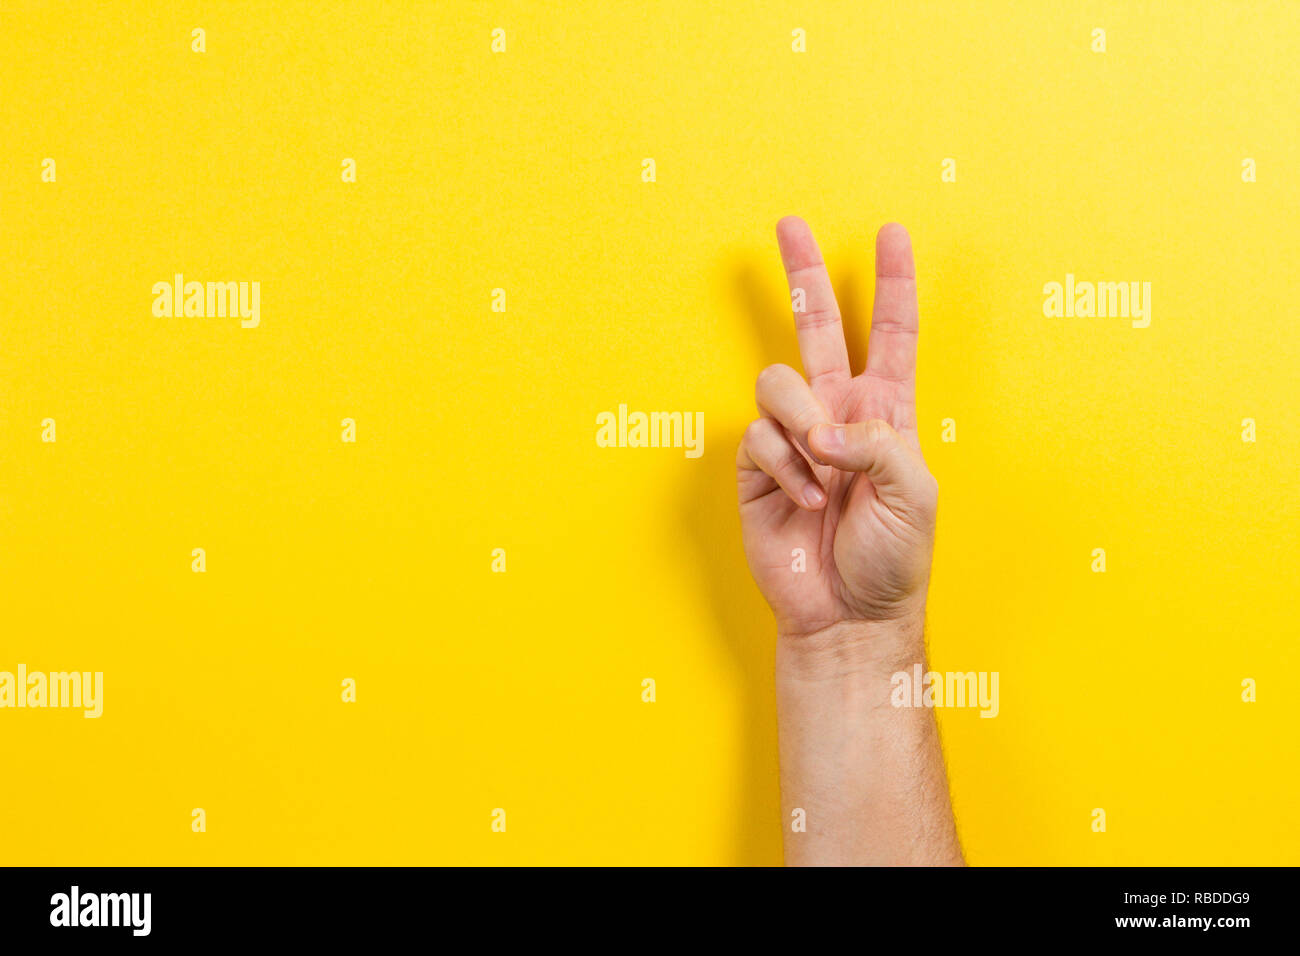 Man hand showing two fingers on yellow background. Number two symbol Stock Photo